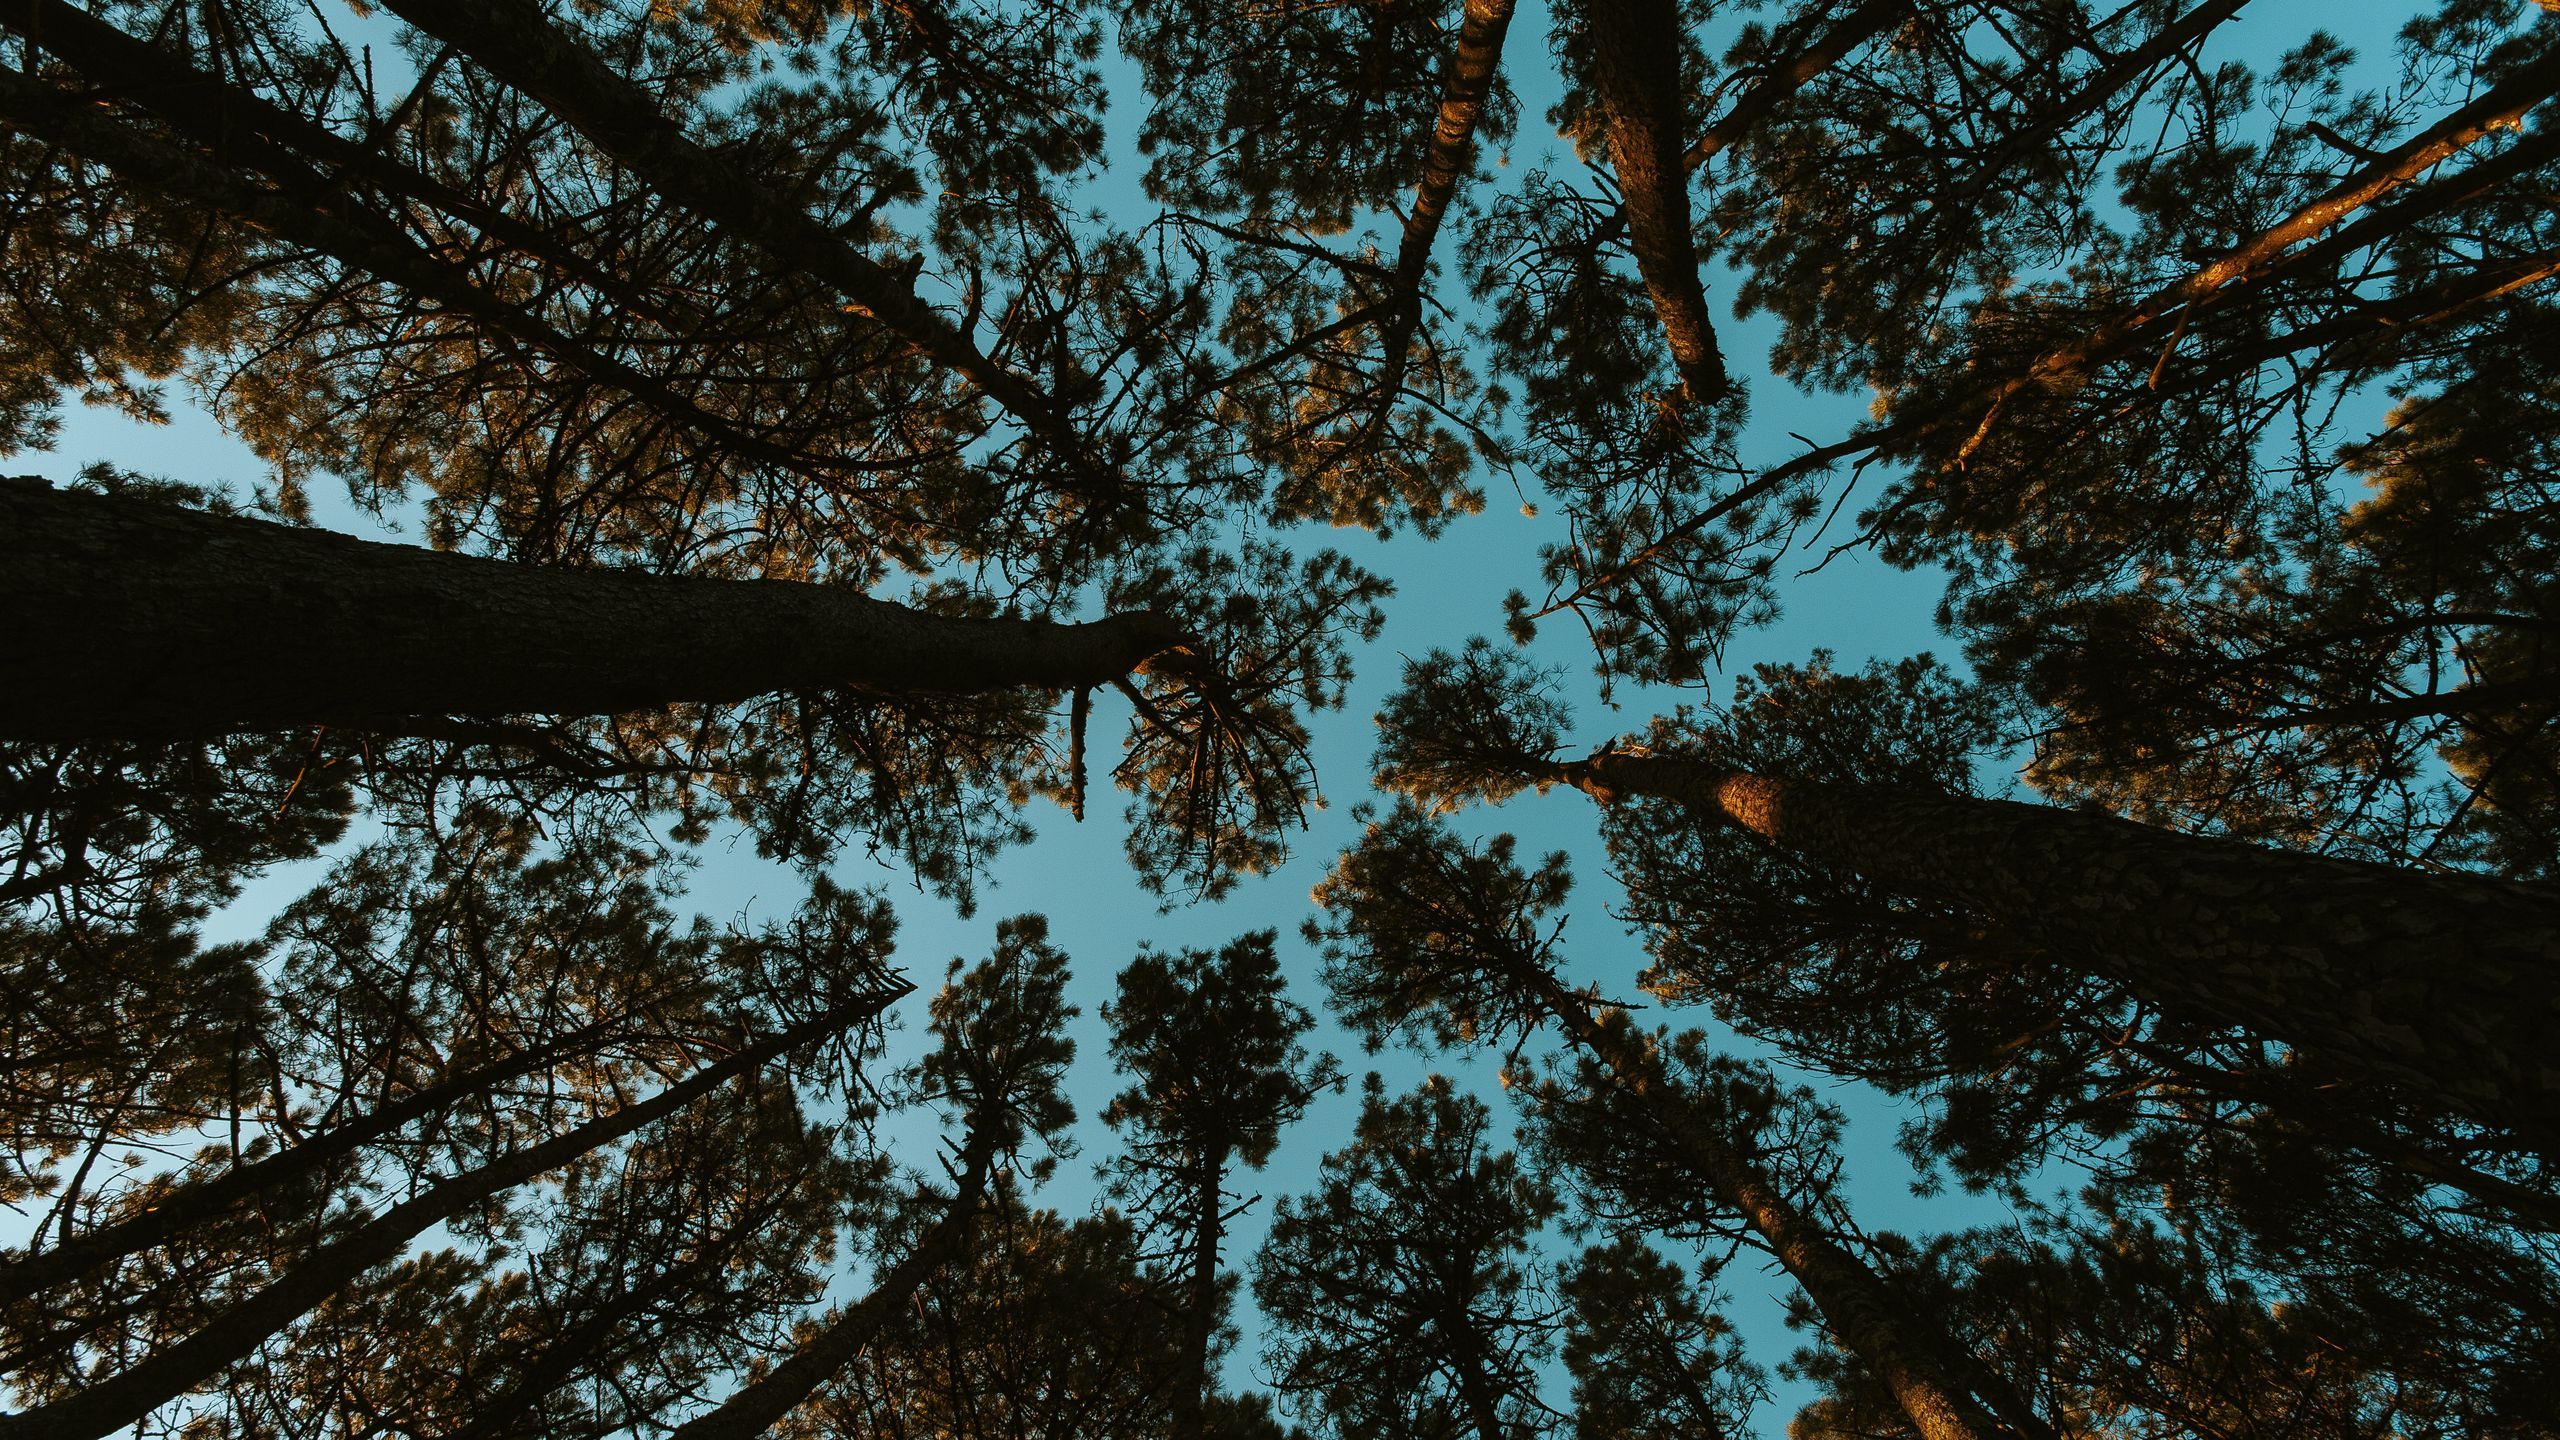 Download wallpaper 2560x1440 forest, trees, sky, bottom view